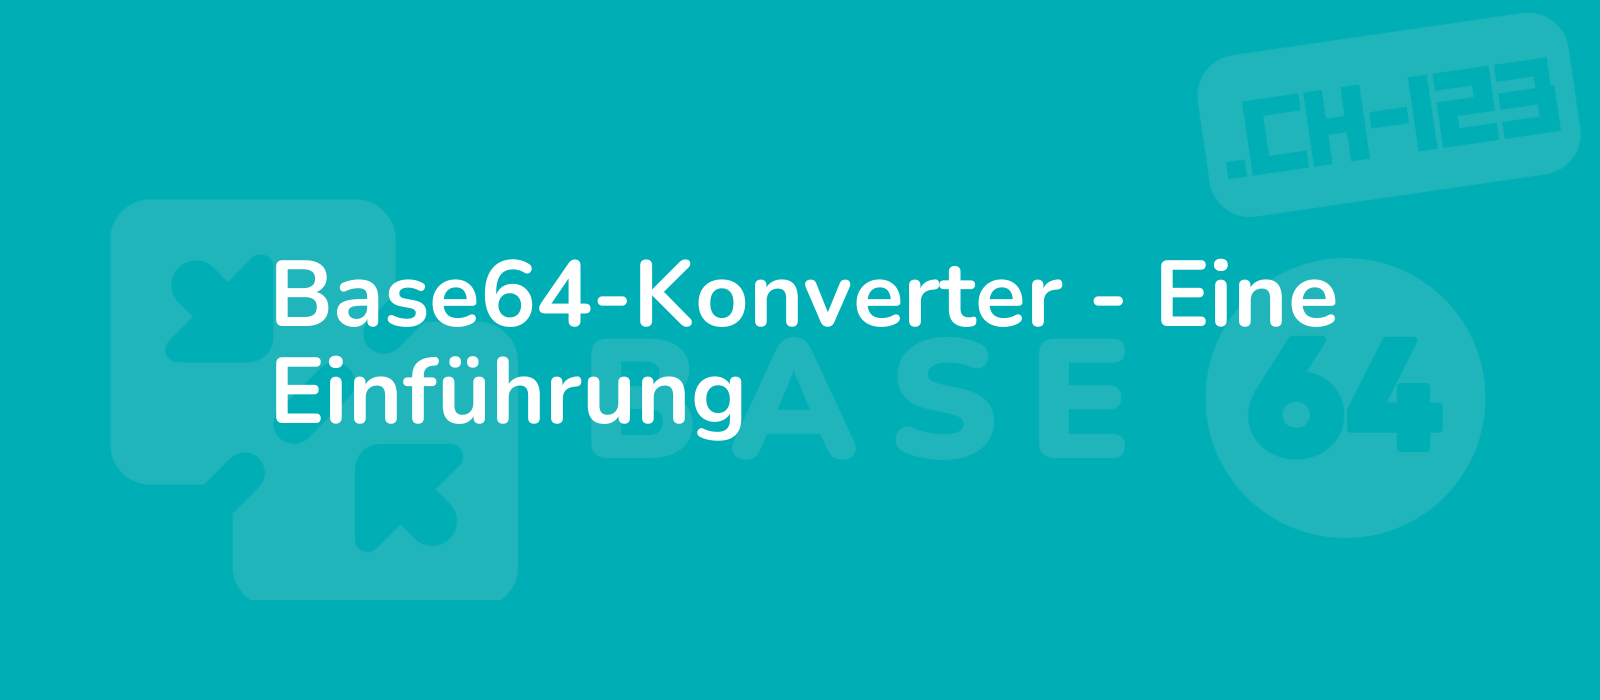 modern graphic with base64 symbols on a sleek background representing the simplicity and functionality of base64 converter